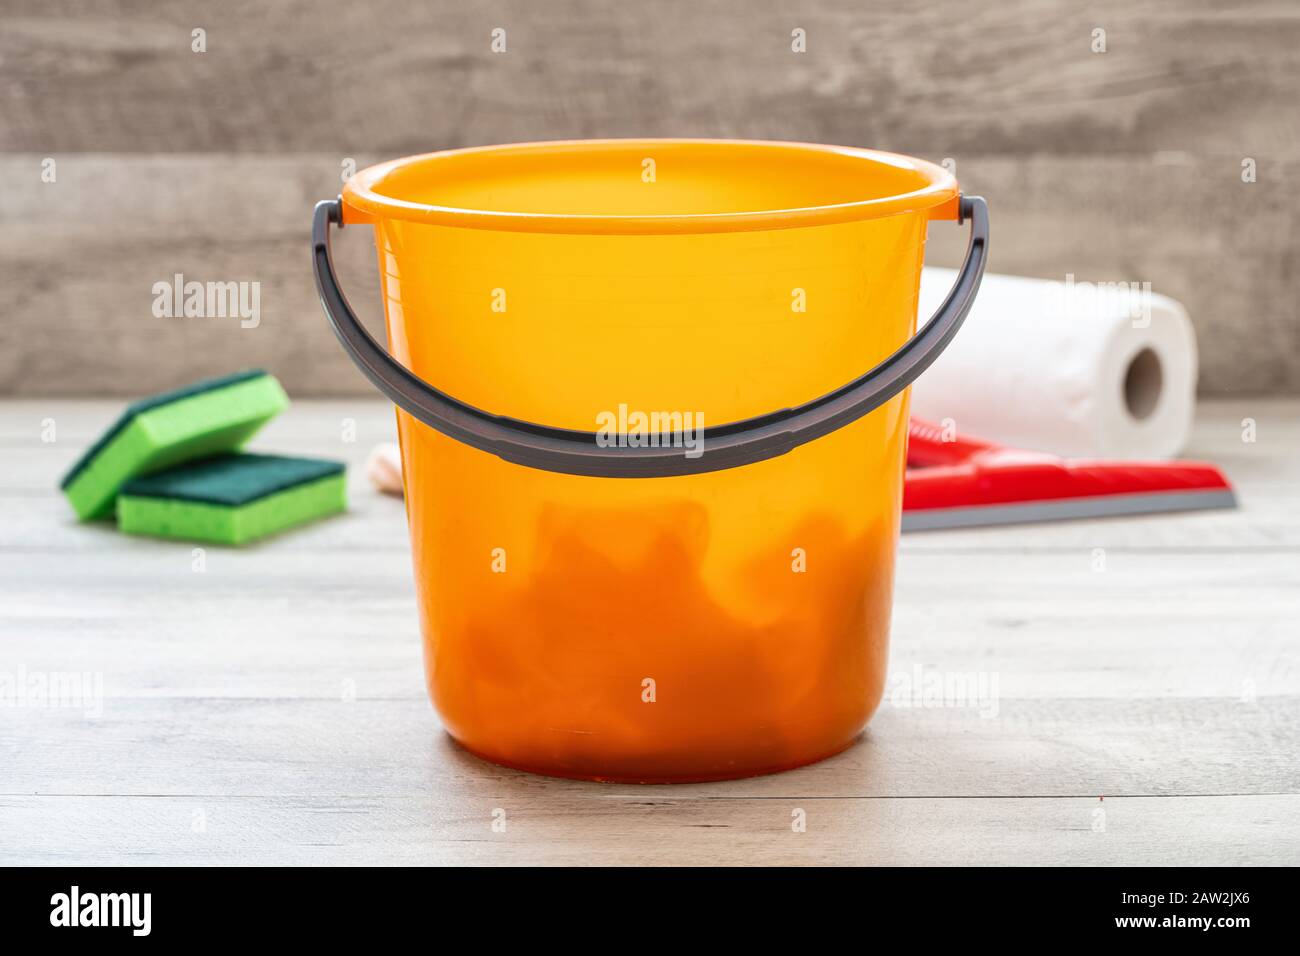 Cleaning bucket orange color on the floor, home interior wood floor background. Domestic household or business sanitary cleaning Stock Photo